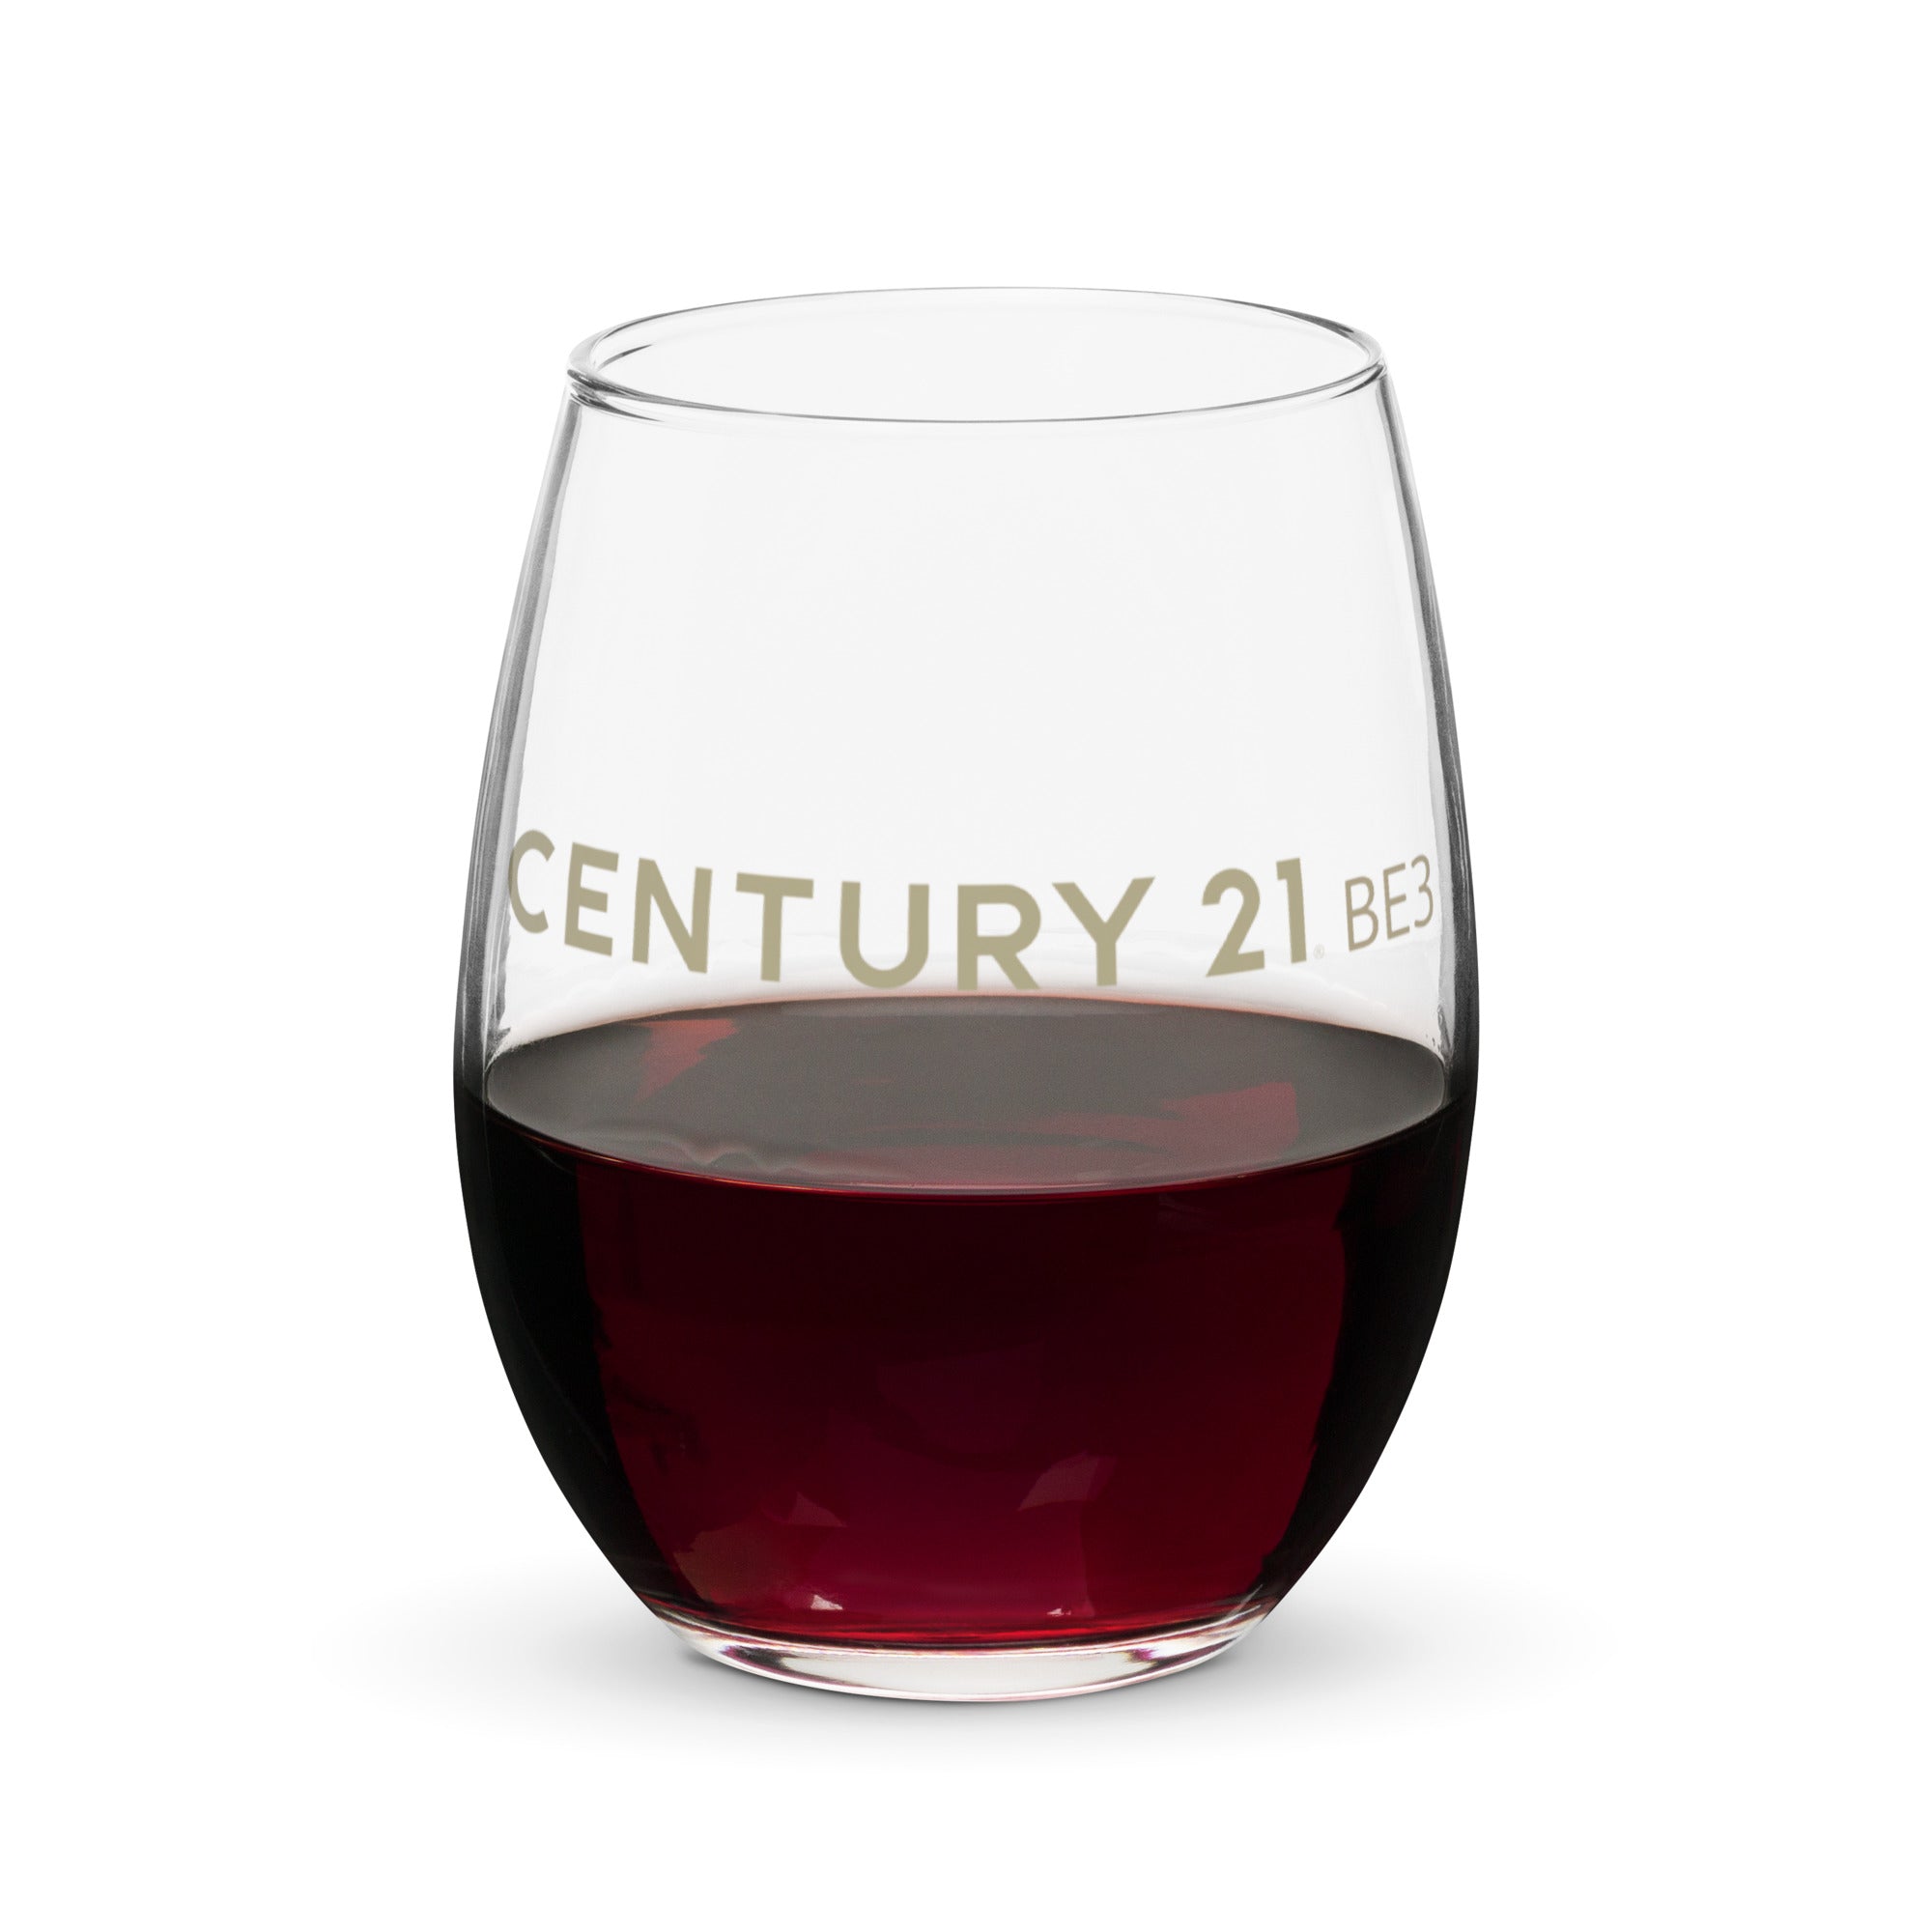 BE3 Word Seal Stemless wine glass